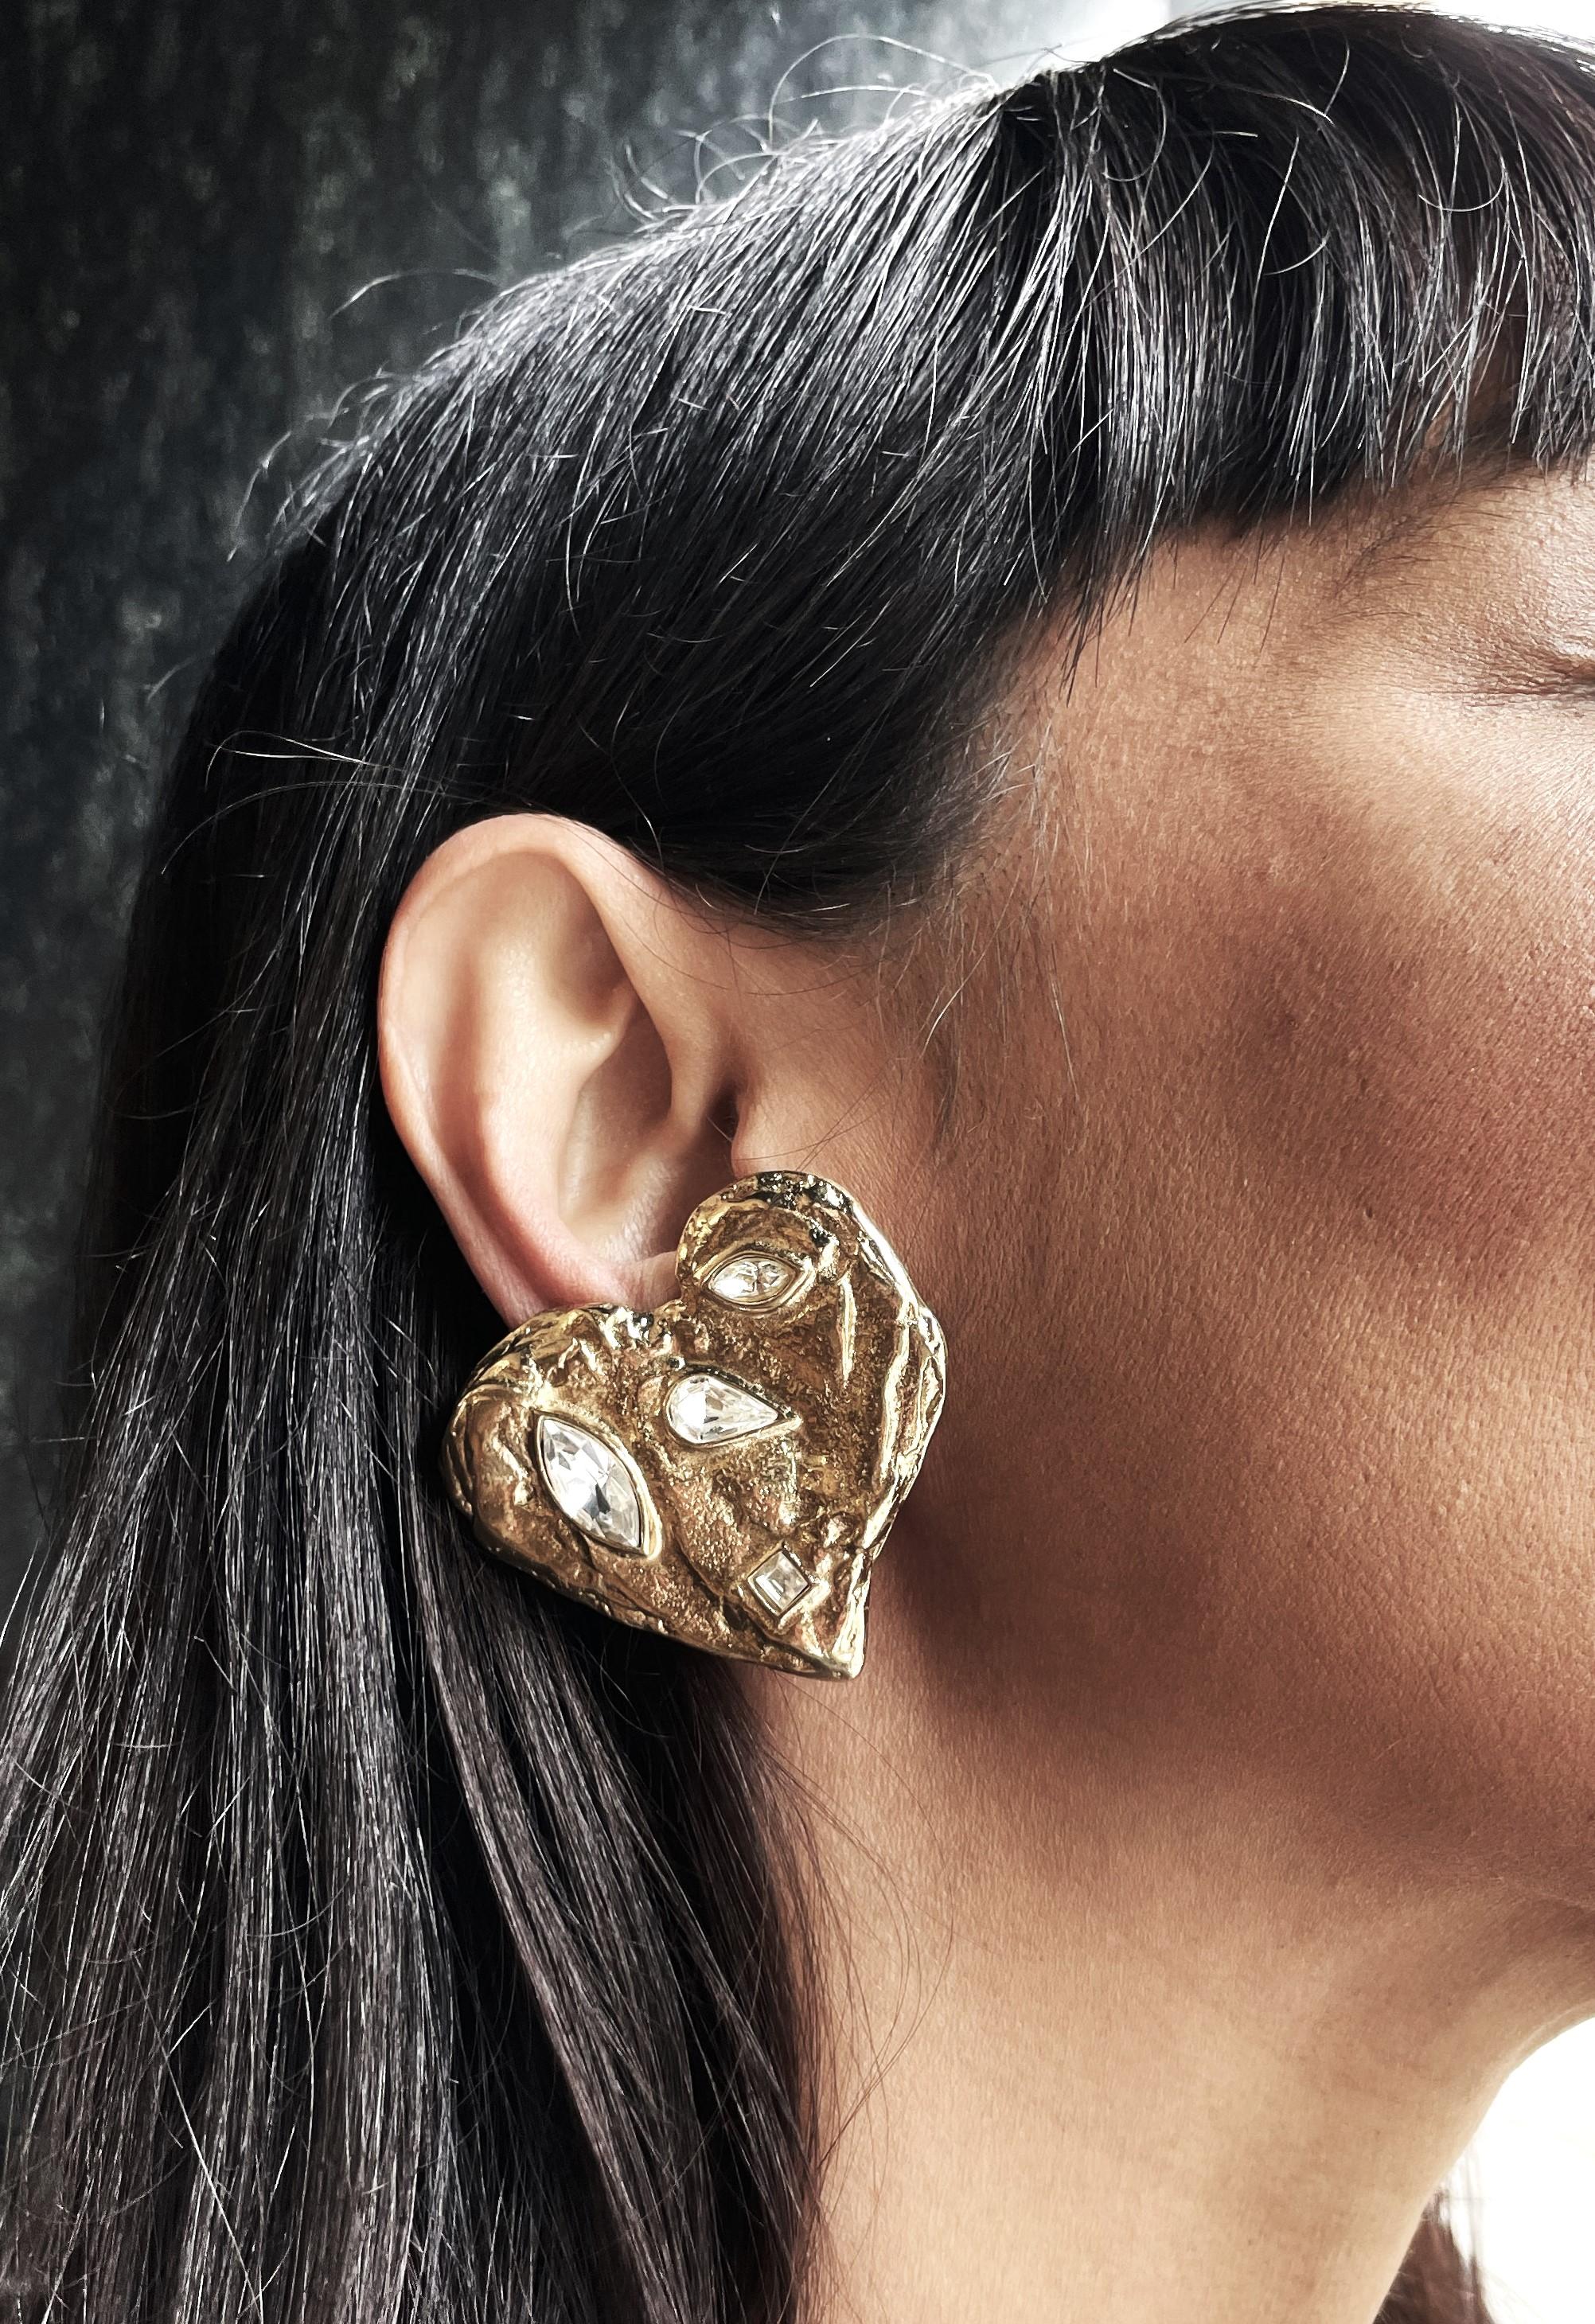 Truly magnificant, fabulous and over sized 'HEART' by YVES SAINT LAURENT Paris earring. 
The large, slightly different golden hearts are decorated with rhinestones in different shapes and sizes, which is so typical for YSL.

Measurement 
Height of